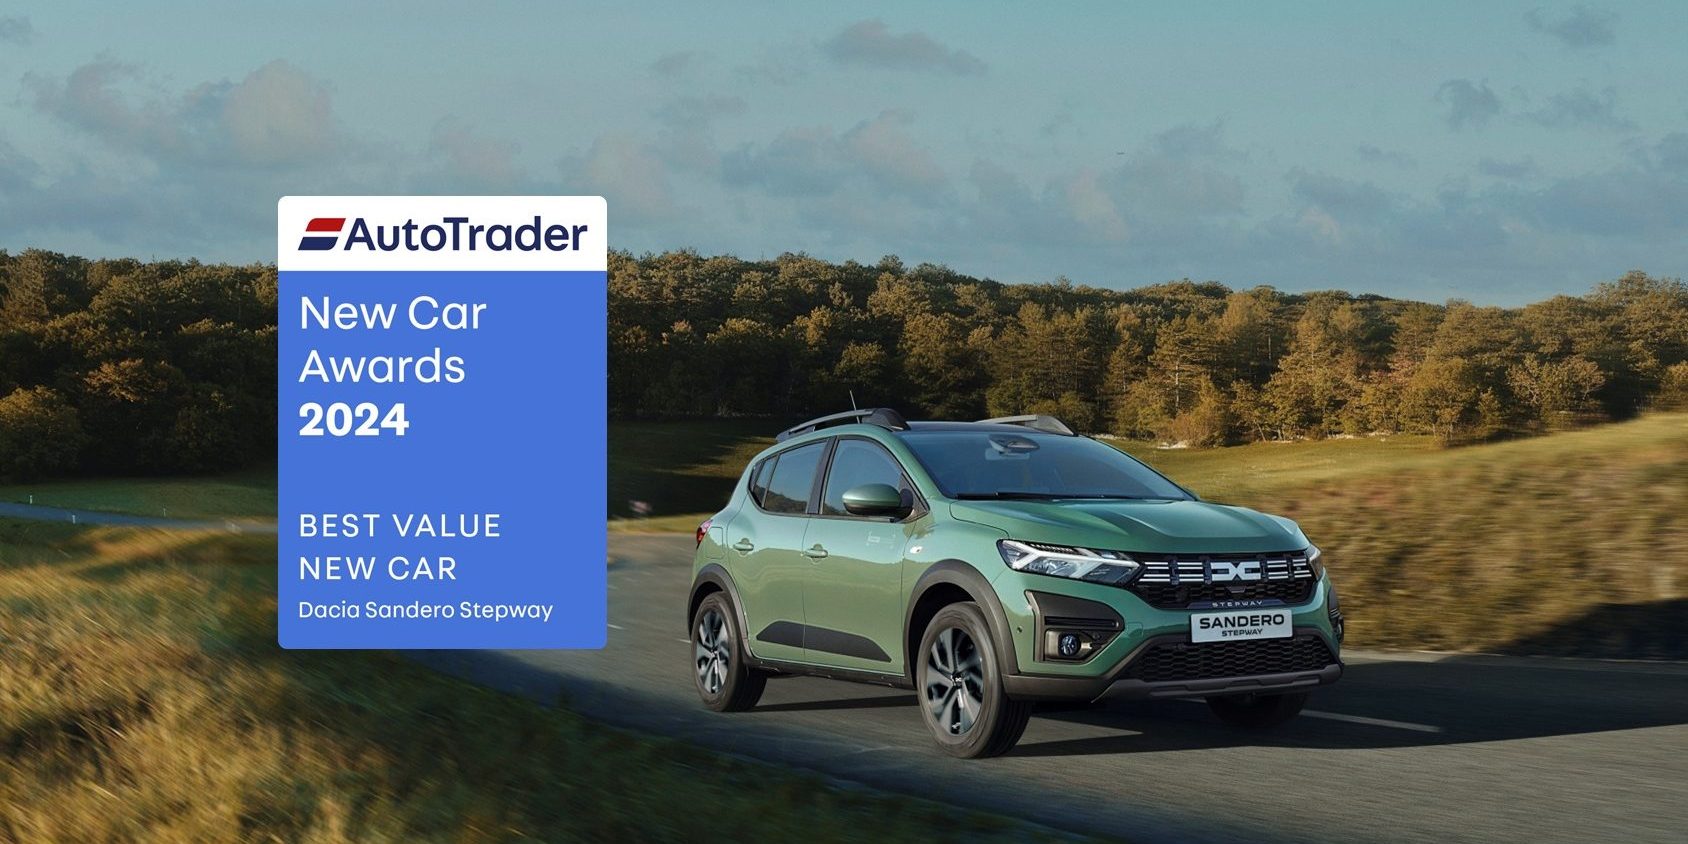 Dacia wins ‘Best Value Brand’ at the Auto Trader New Car Awards for the sixth time